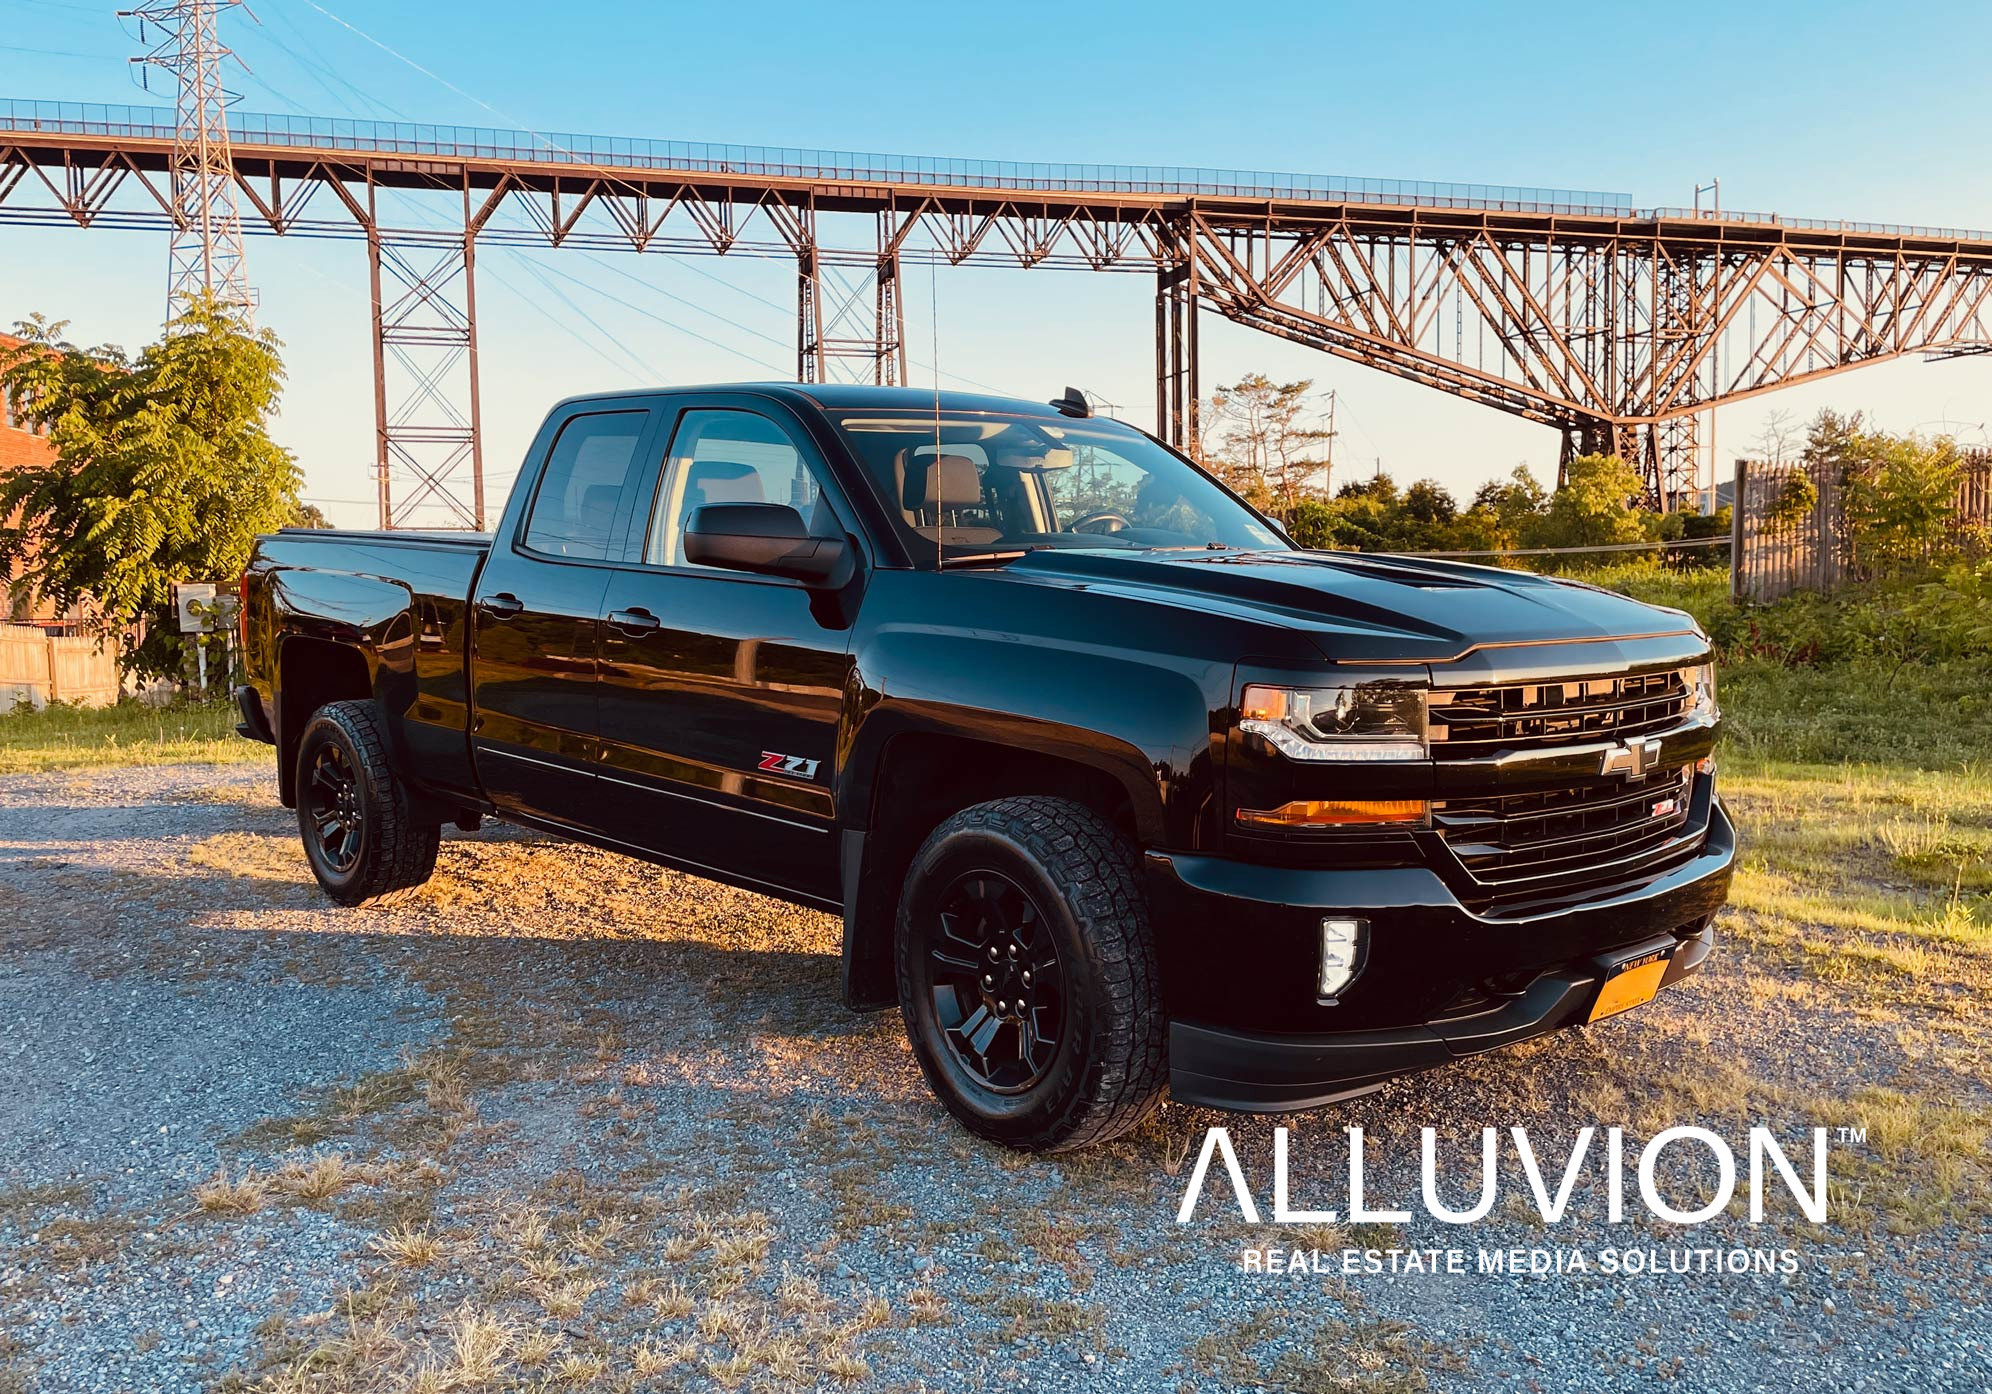 Renting a Chevrolet Silverado Truck on Turo is the Best Way to Experience Hudson Valley – Presented by Alluvion Vacations